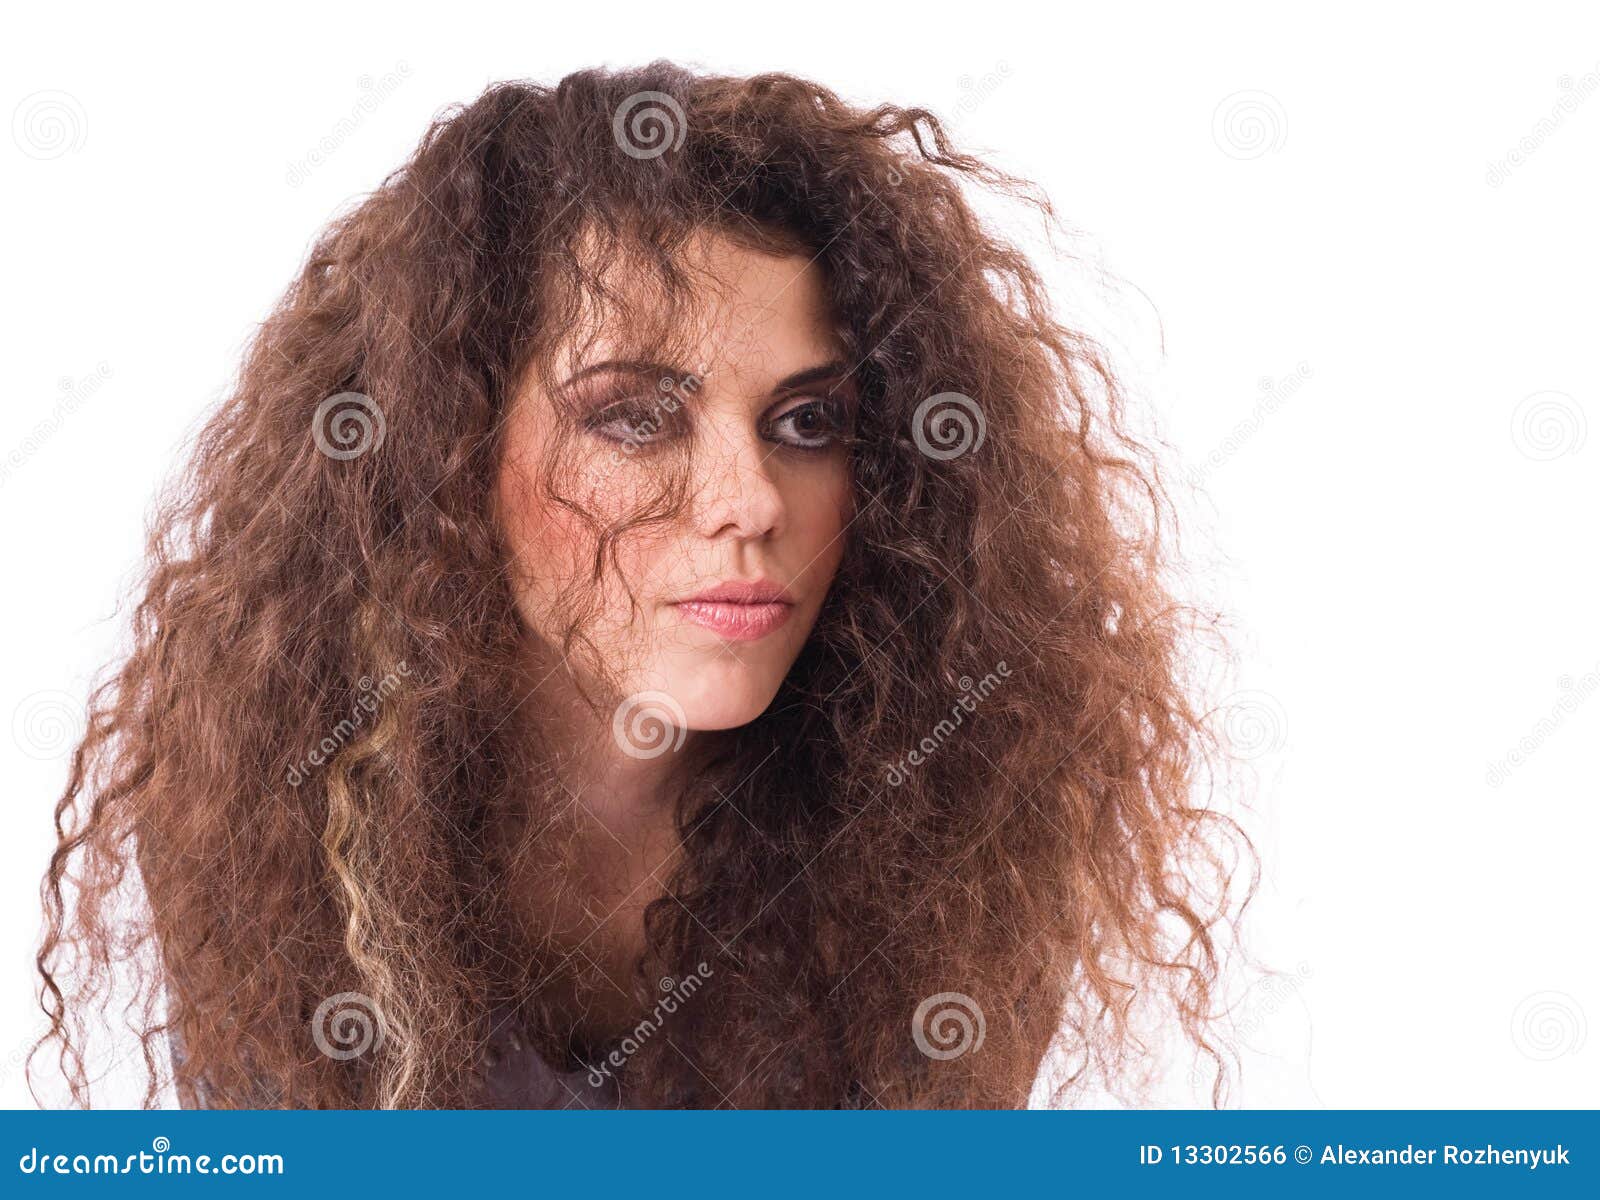 Sadness curly-headed girl stock photo. Image of looking - 13302566